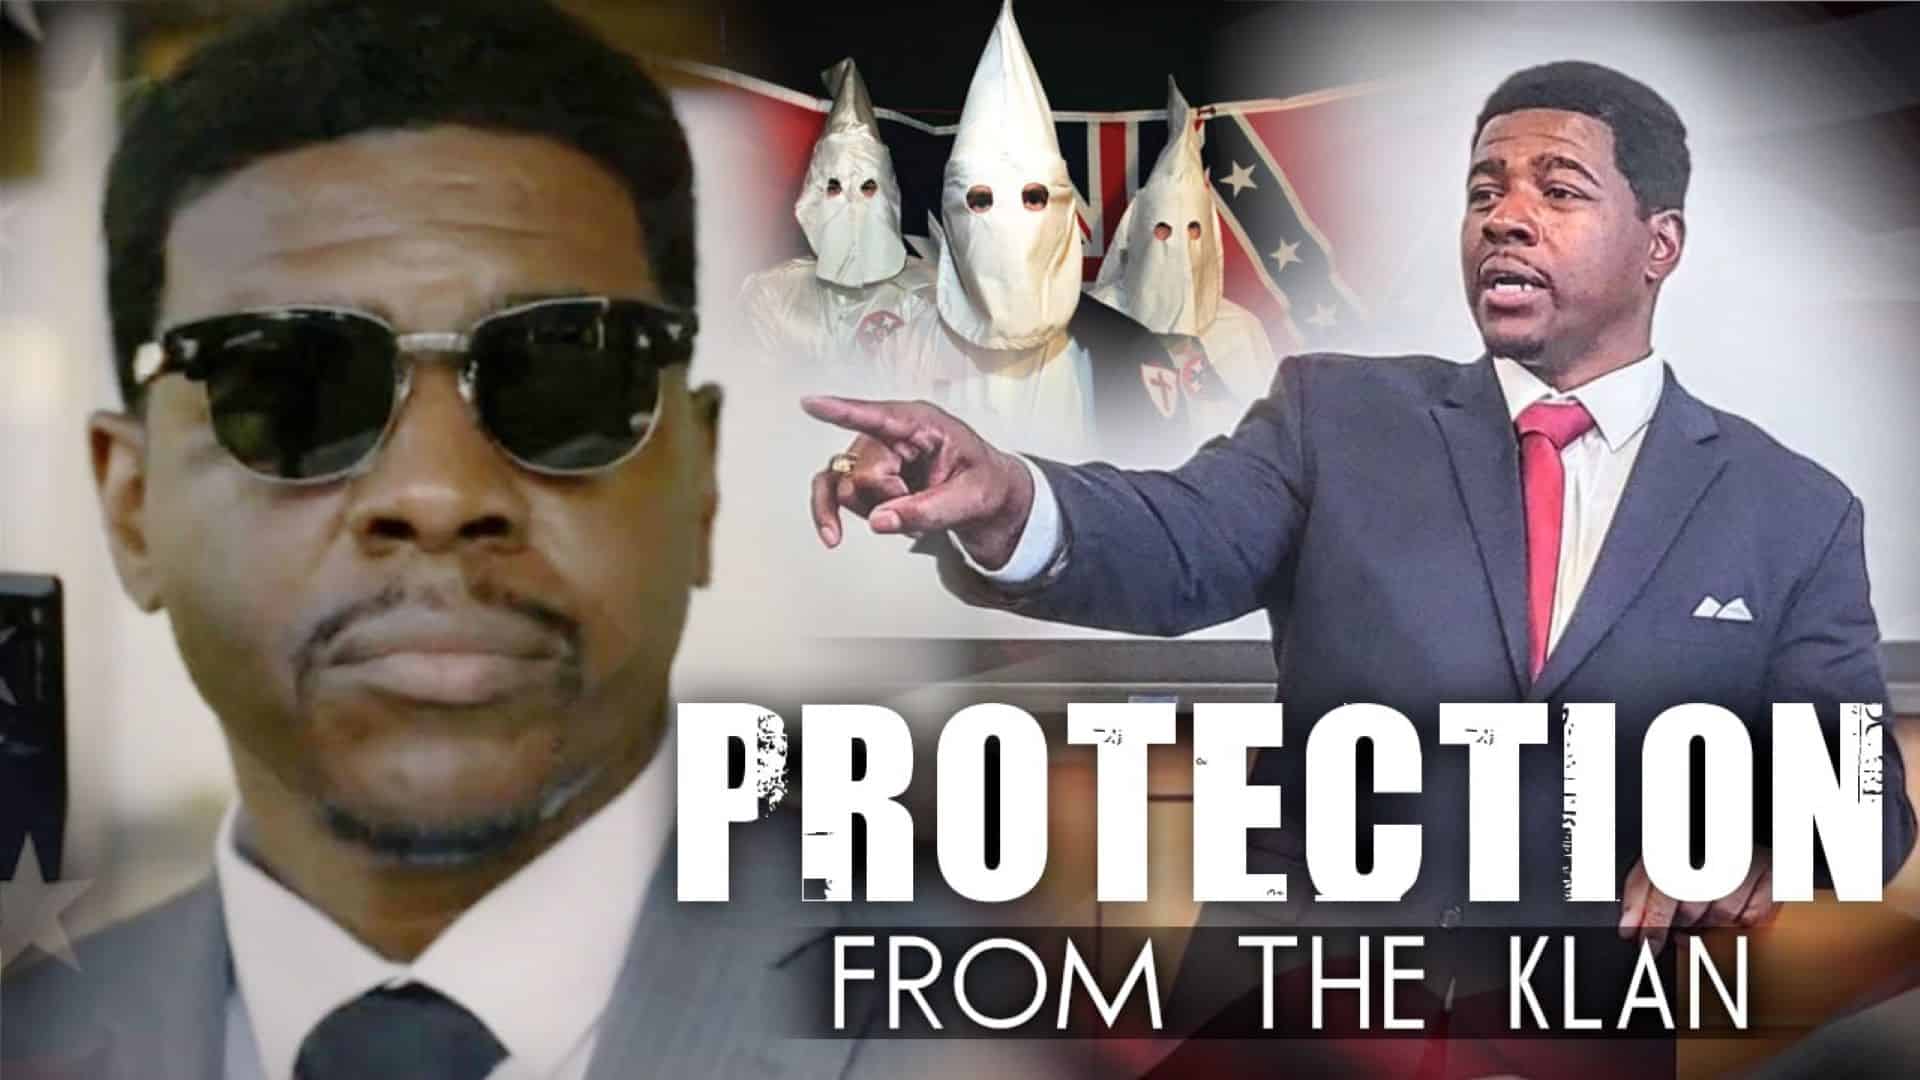 Black GOP Candidate Jerone Davidson Says We Need AR-15s To Protect Us From The Klan